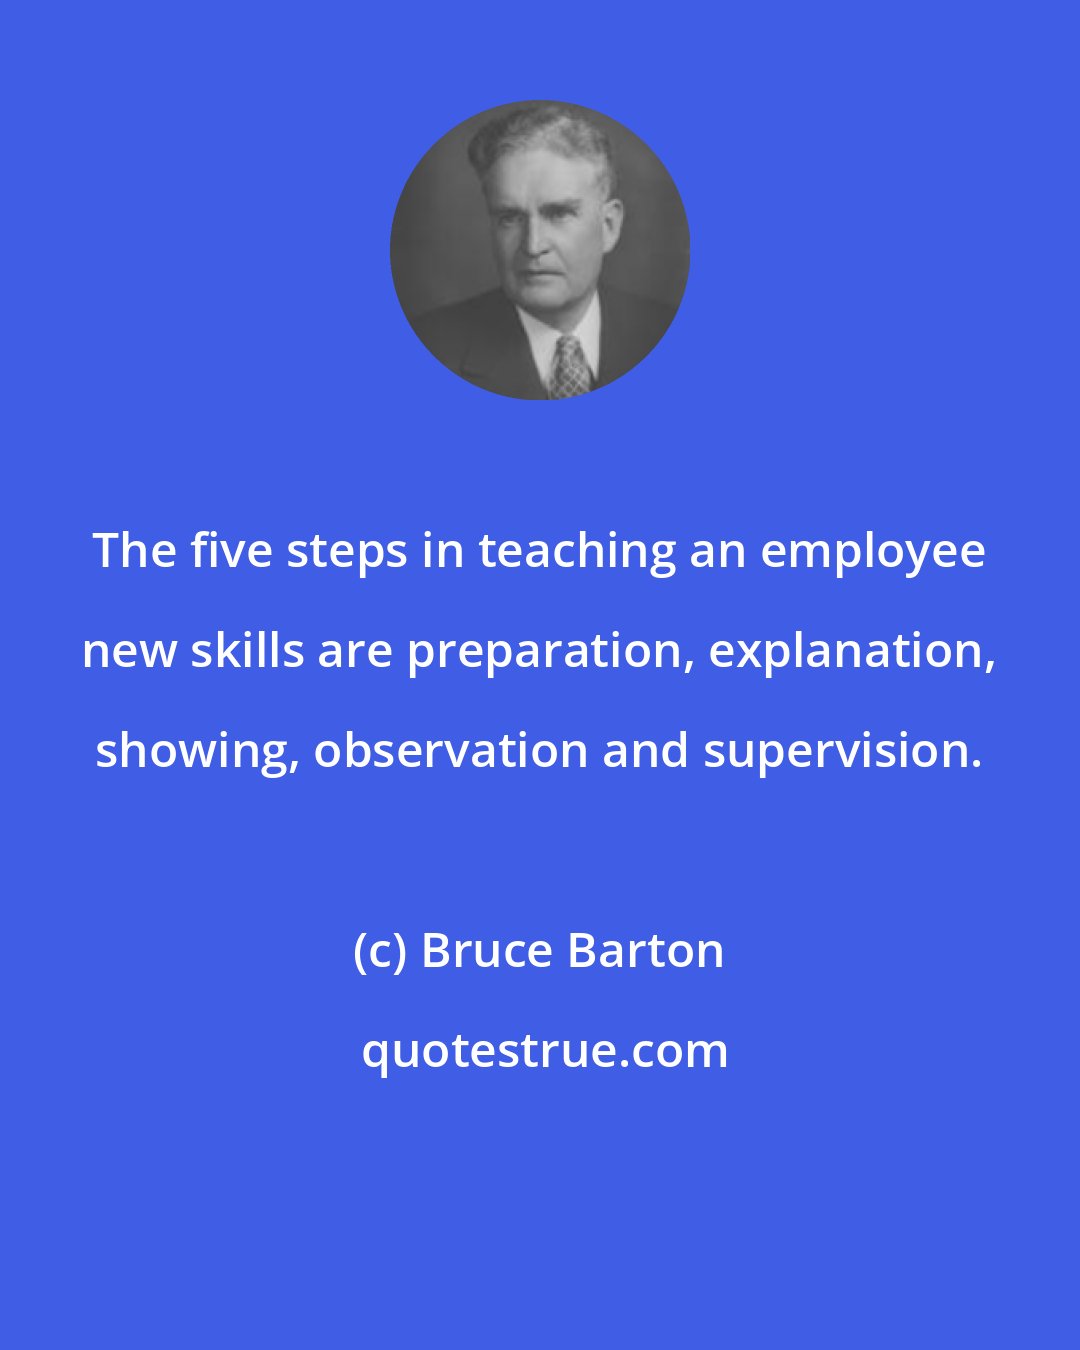 Bruce Barton: The five steps in teaching an employee new skills are preparation, explanation, showing, observation and supervision.